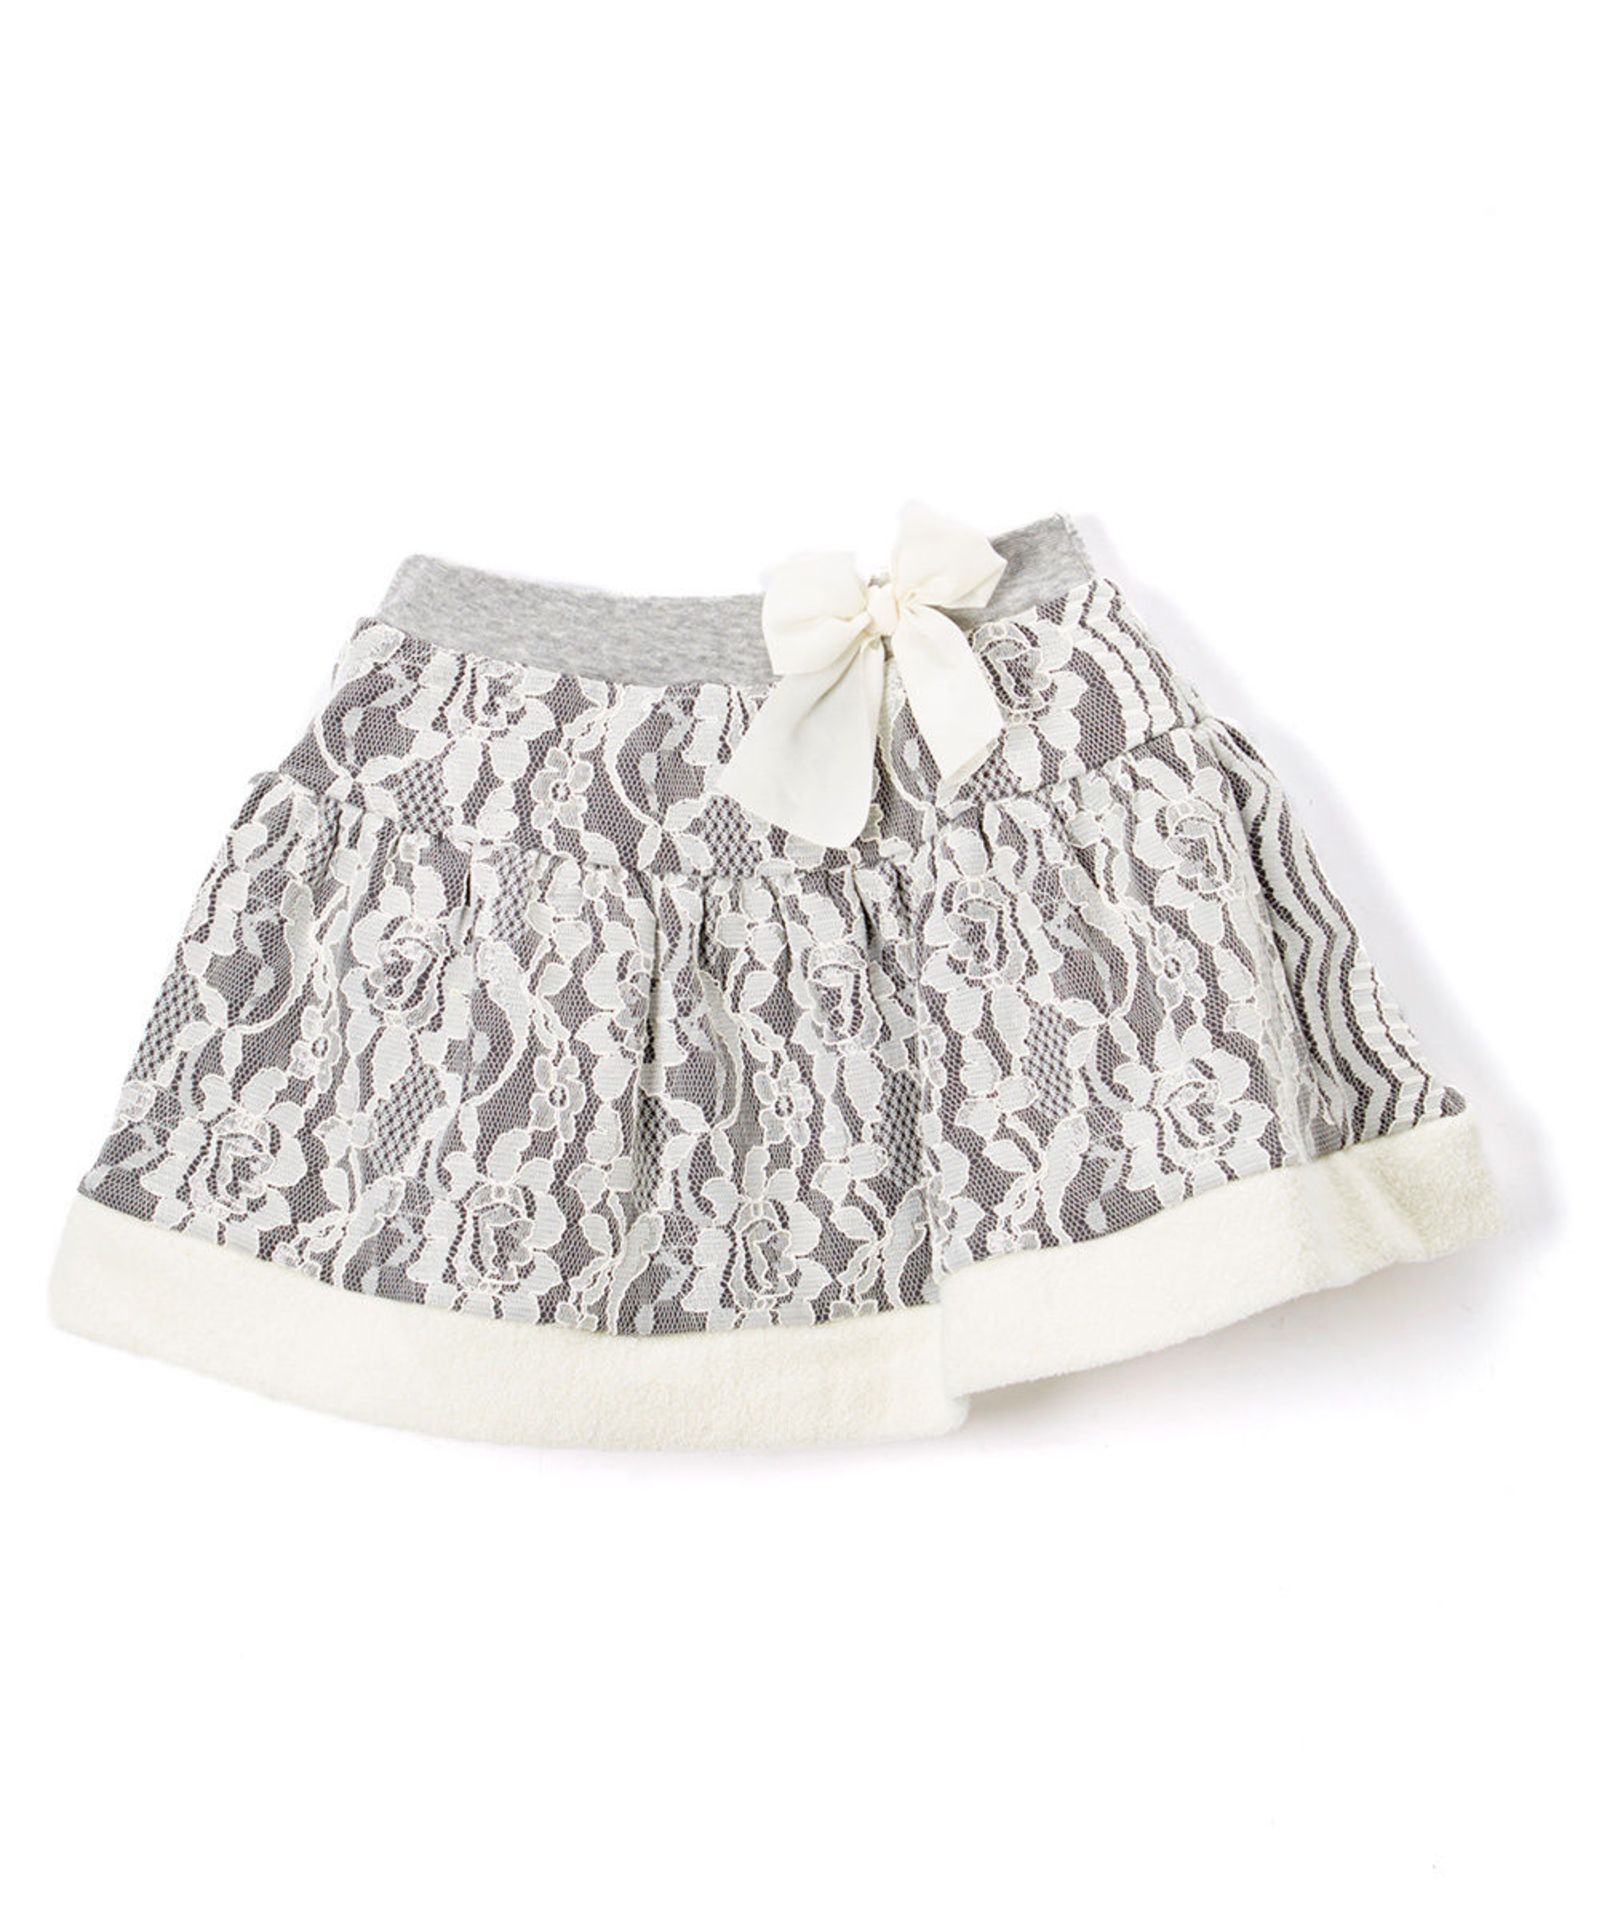 Frills Du Jour, Gray Lace Bow-Accent Circle Skirt - Girls, Size 4 Years (New With Tags) [Ref: